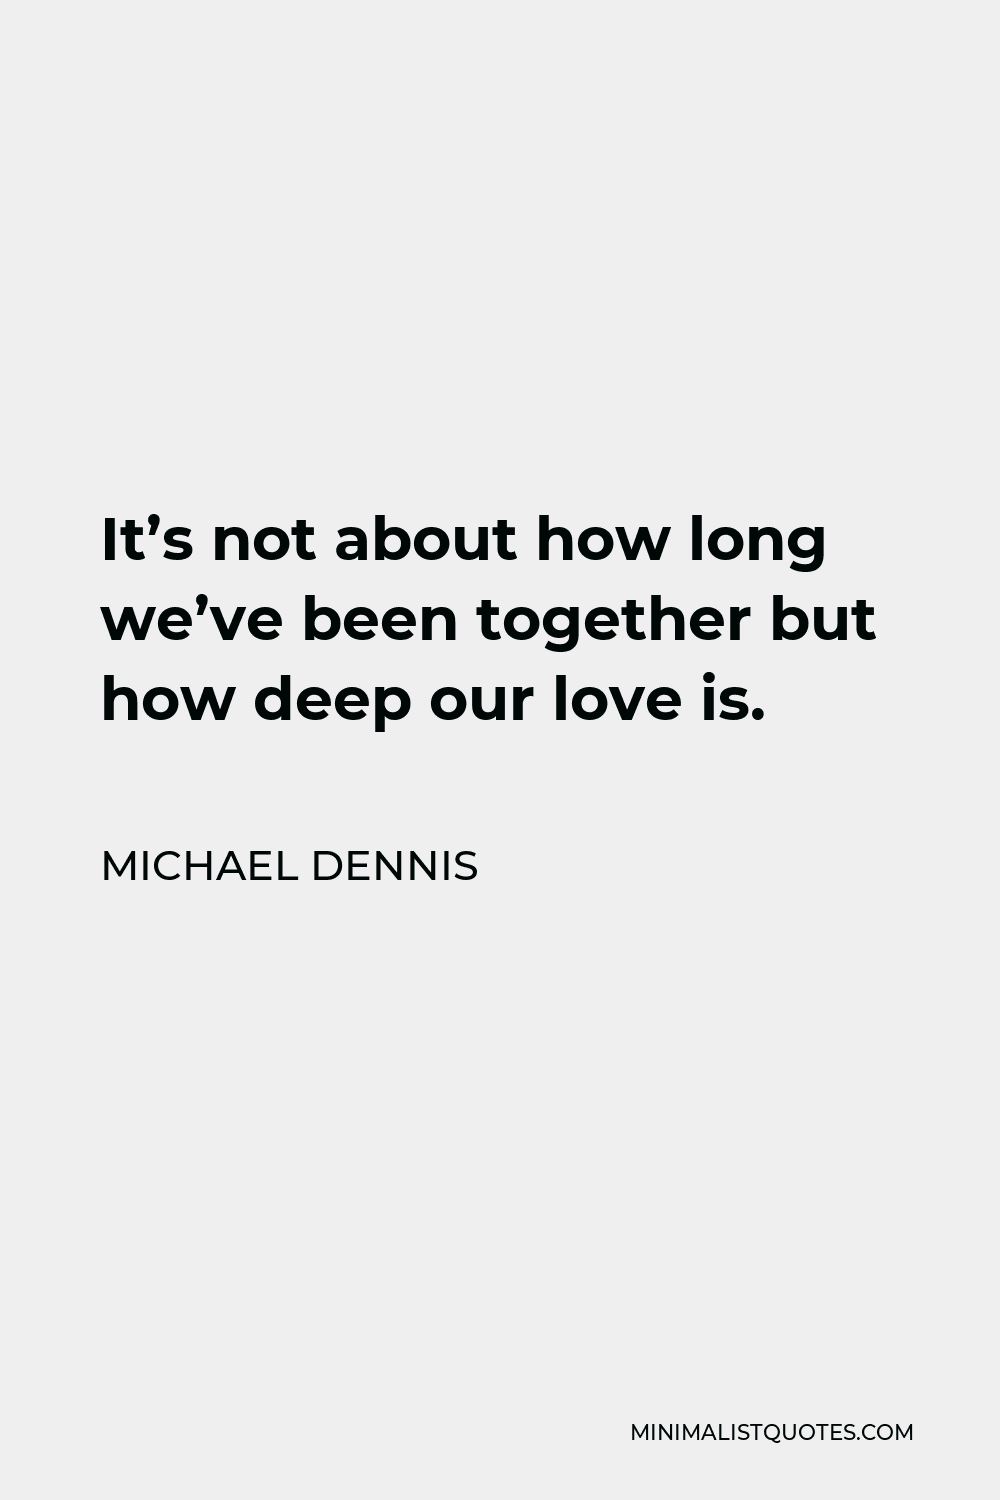 Michael Dennis Quote - It’s not about how long we’ve been together but how deep our love is.